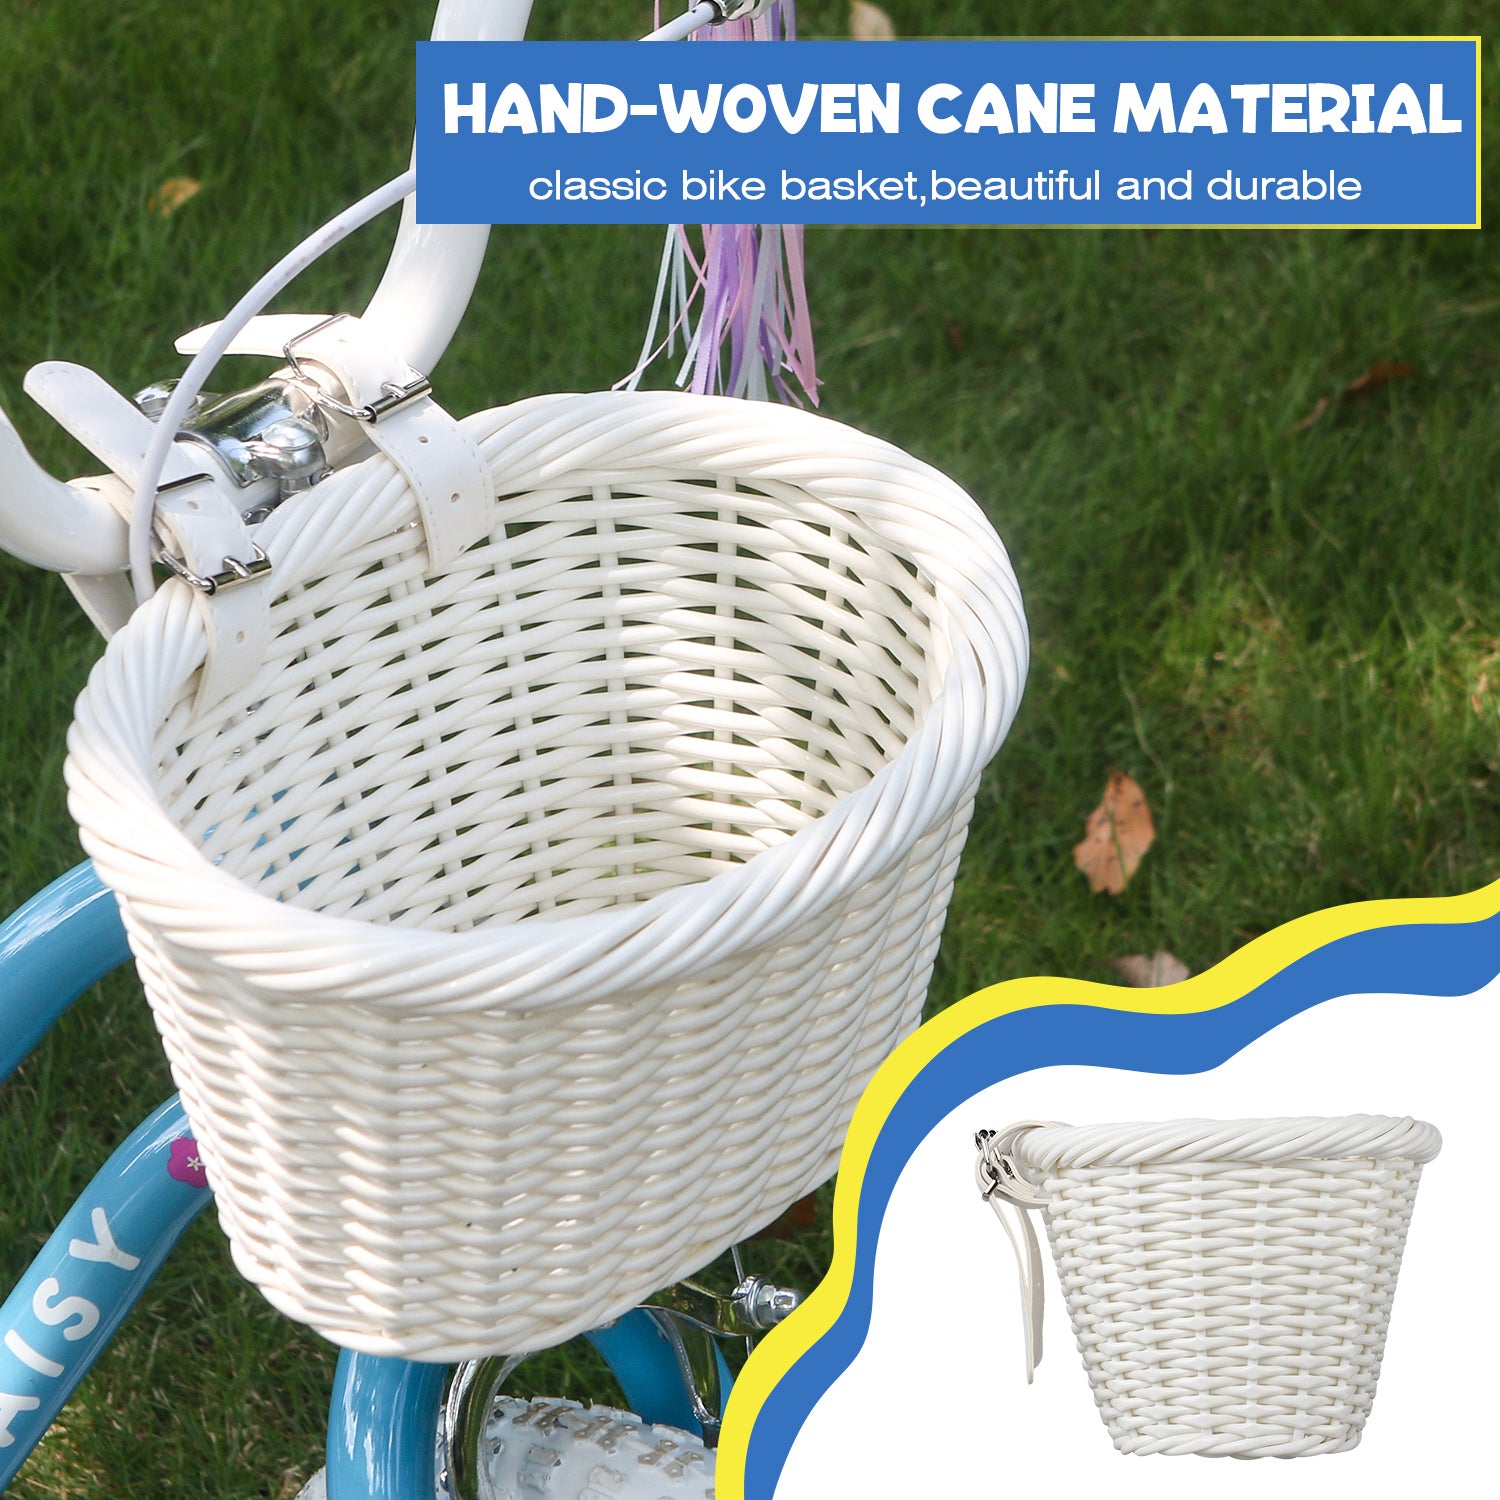 Glerc Woven Mini Bicycle Basket for Children Bicycle Handlebar Bicycle Basket for Girls Boys, Multi-Colours